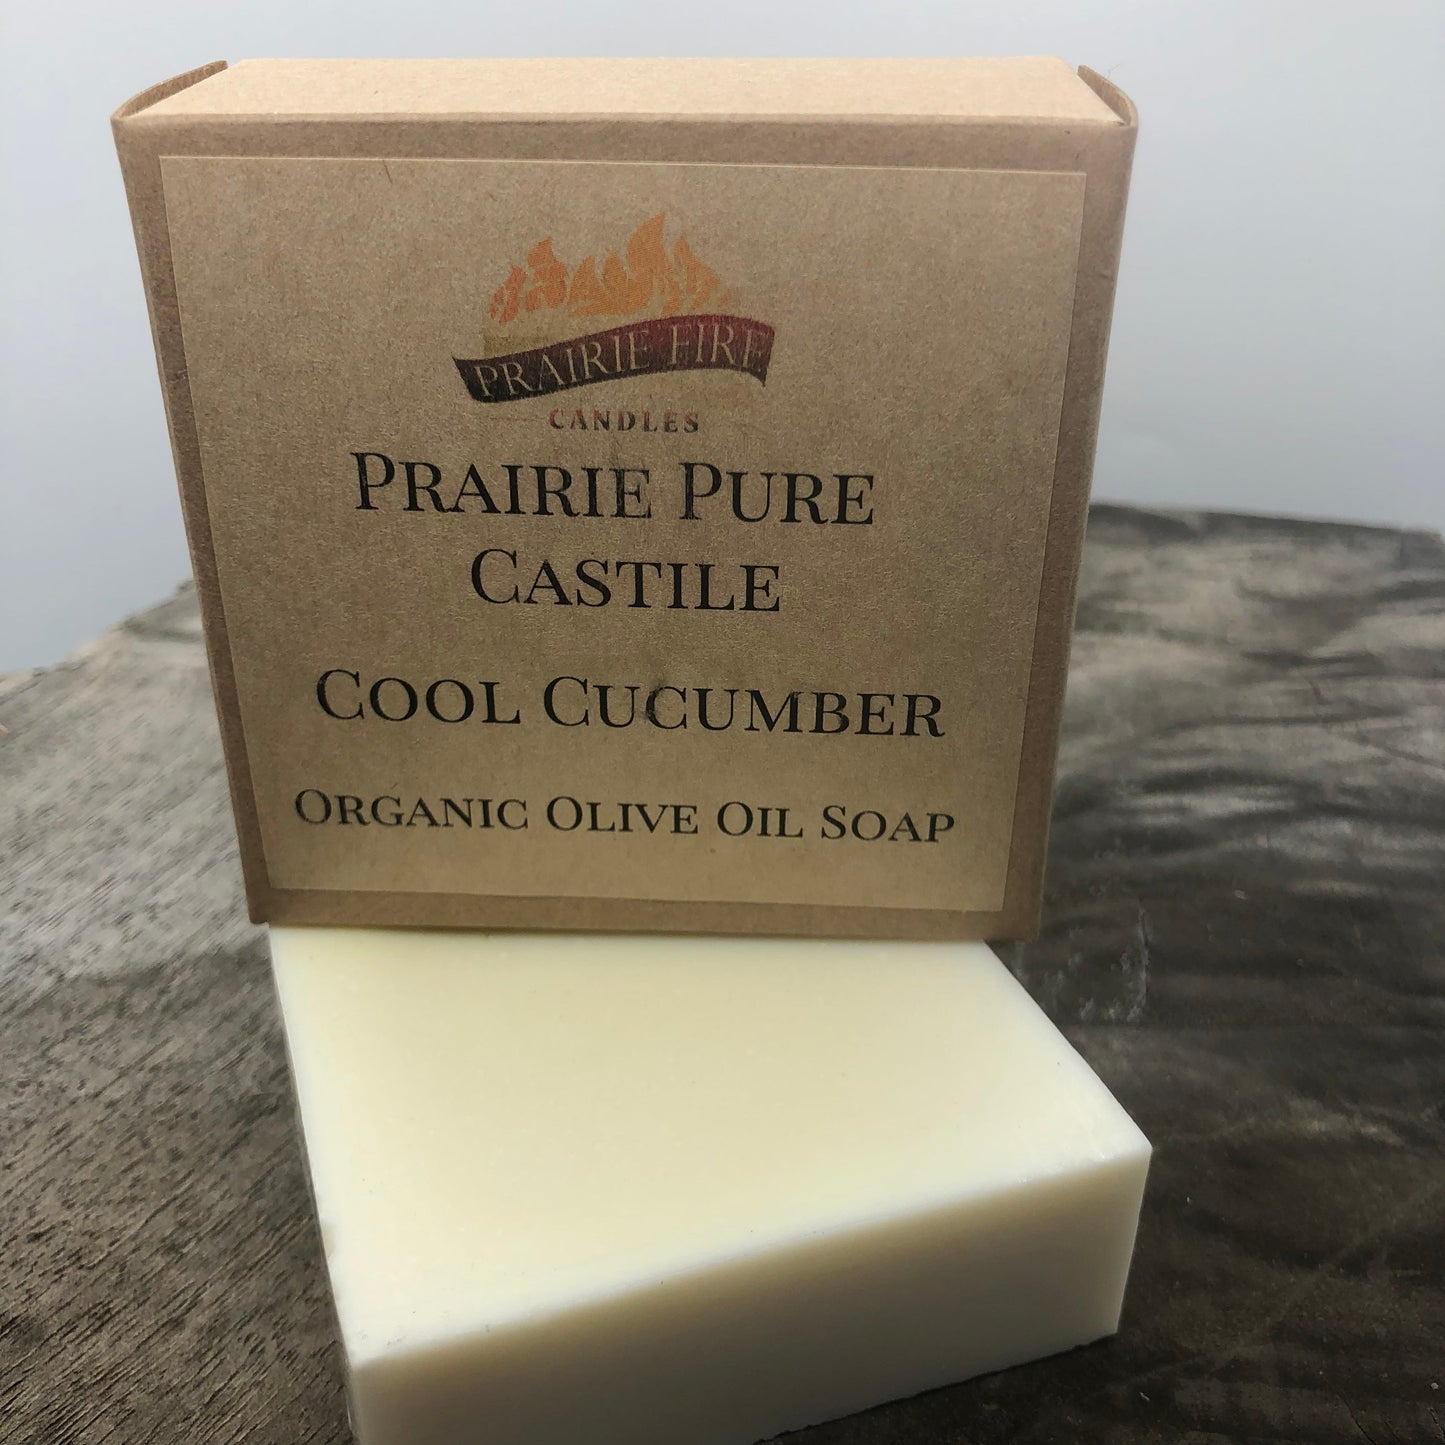 Cool Cucumber Real Castile Organic Olive Oil Soap for Sensitive Skin - Dye Free - 100% Certified Organic Extra Virgin Olive Oil